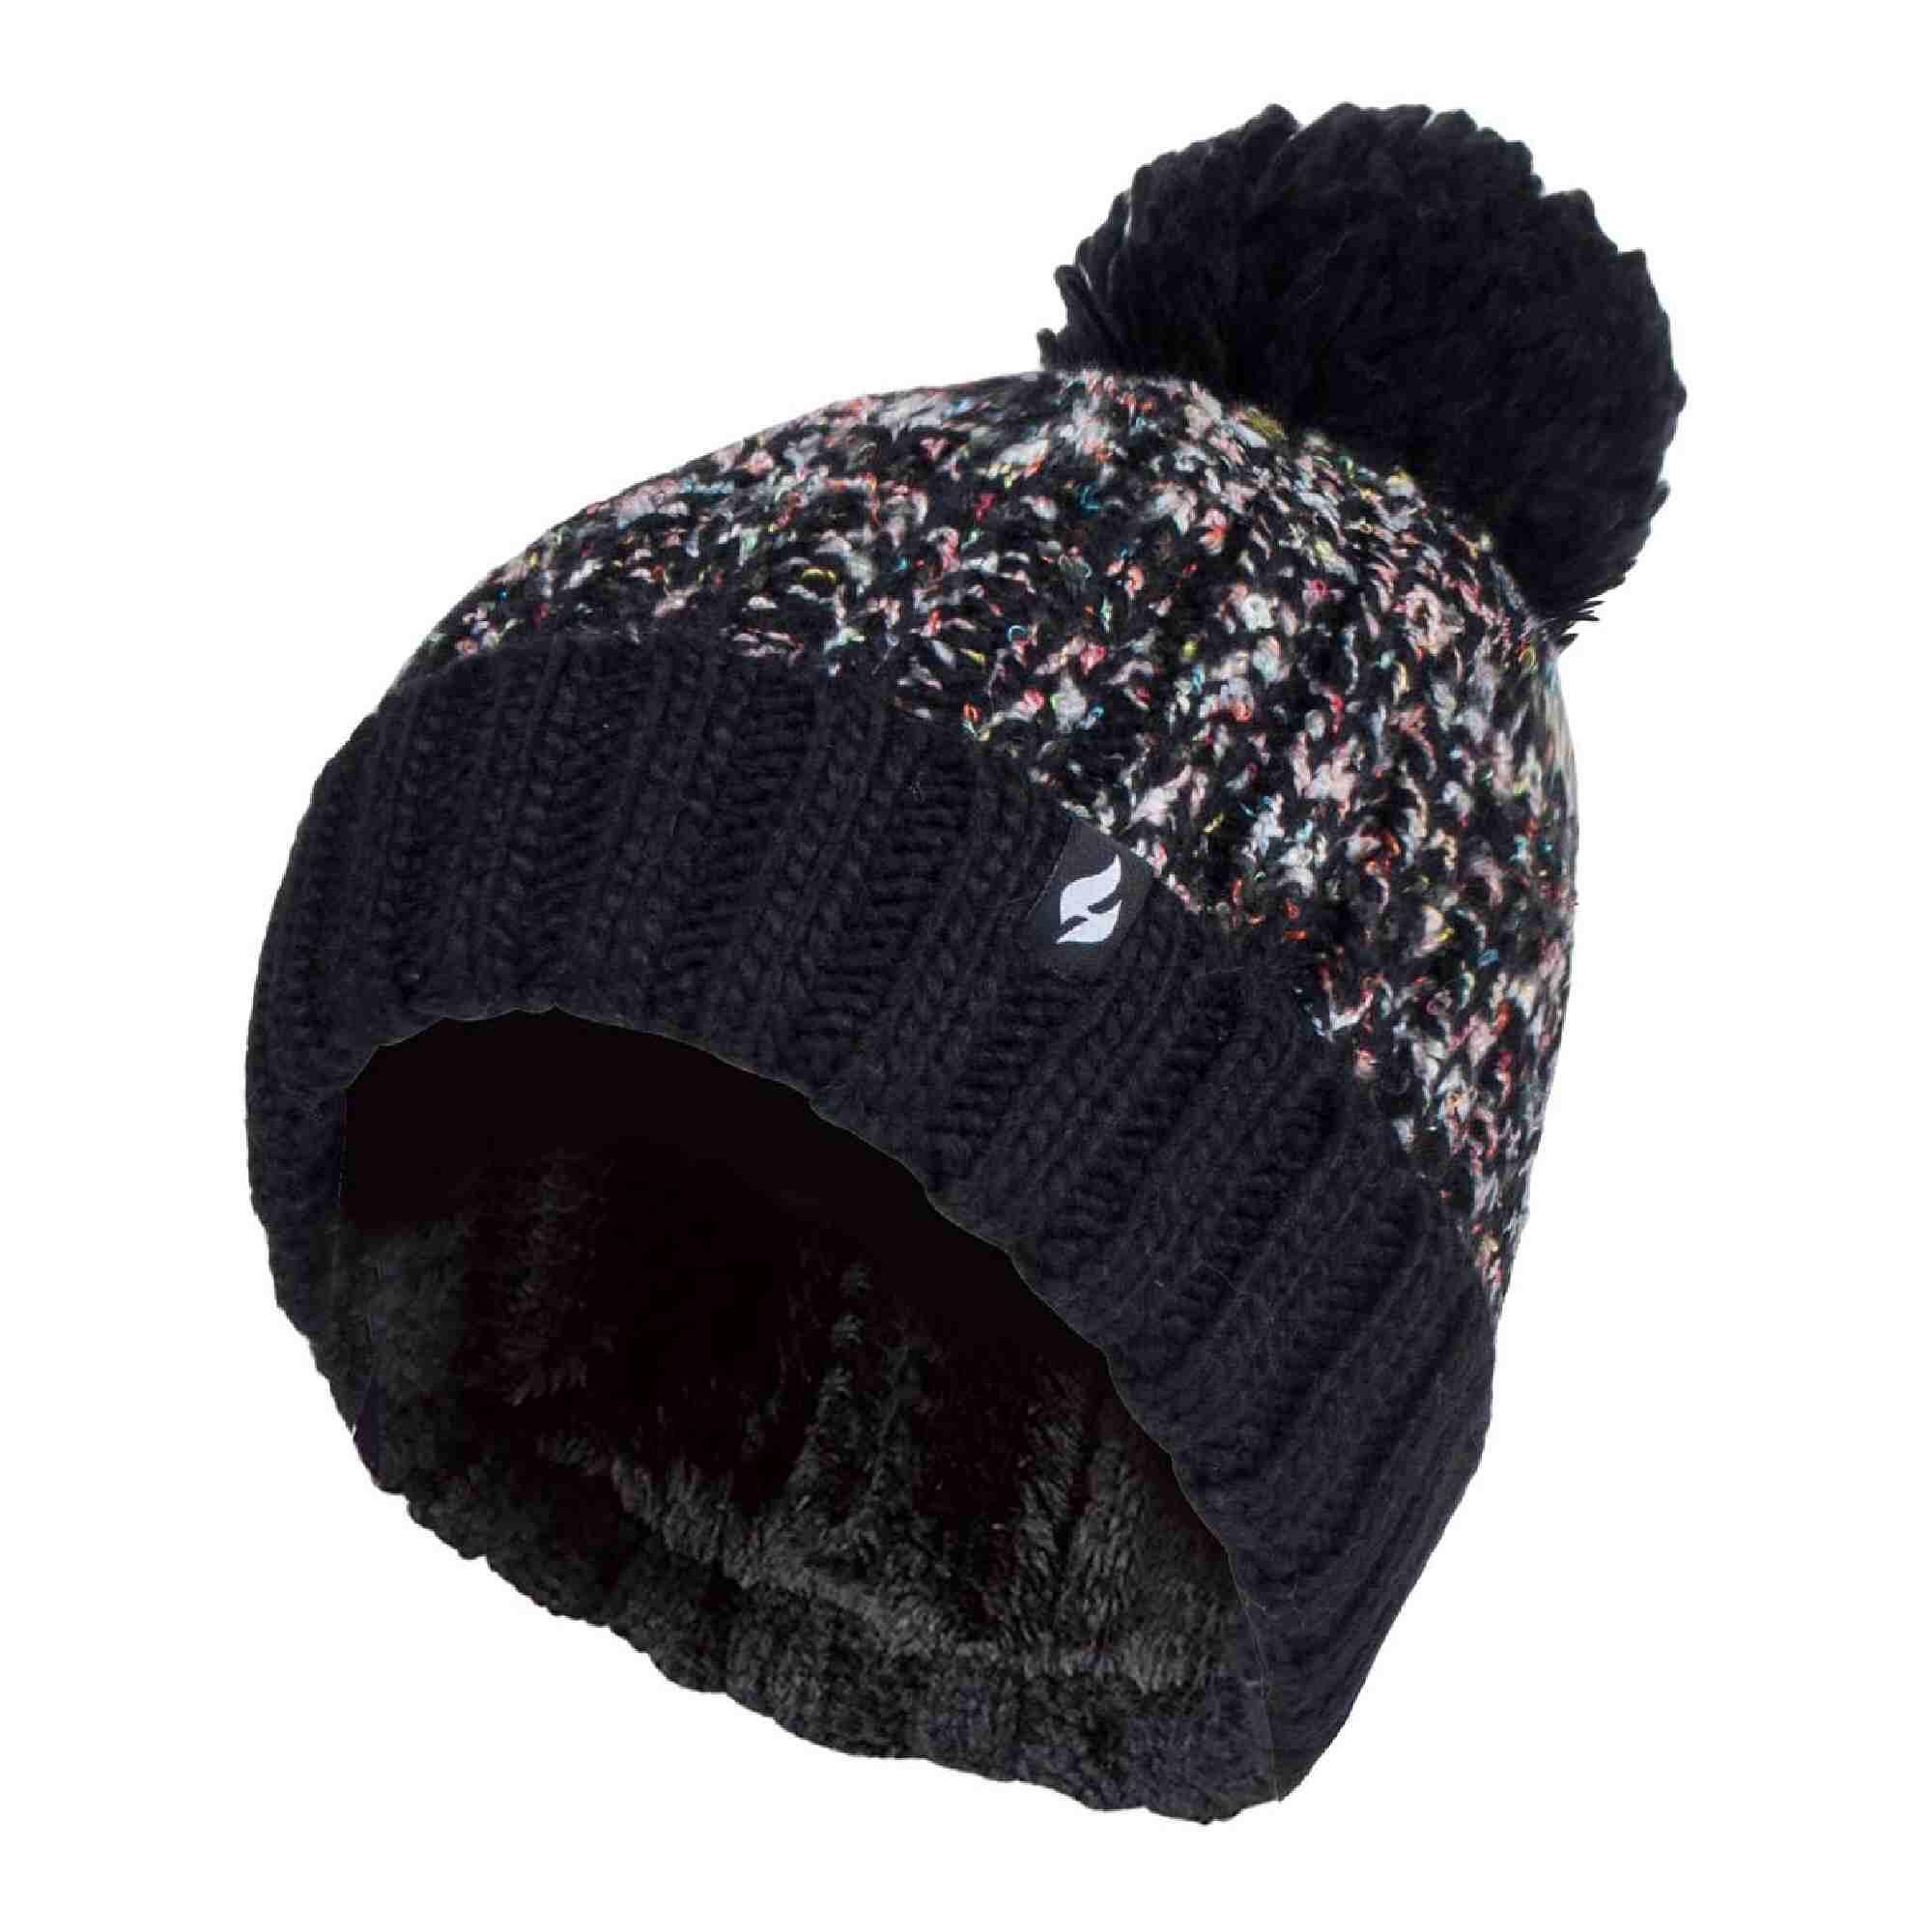 HEAT HOLDERS Ladies Thermal Winter Bobble Hat With Extra Large Pom Pom